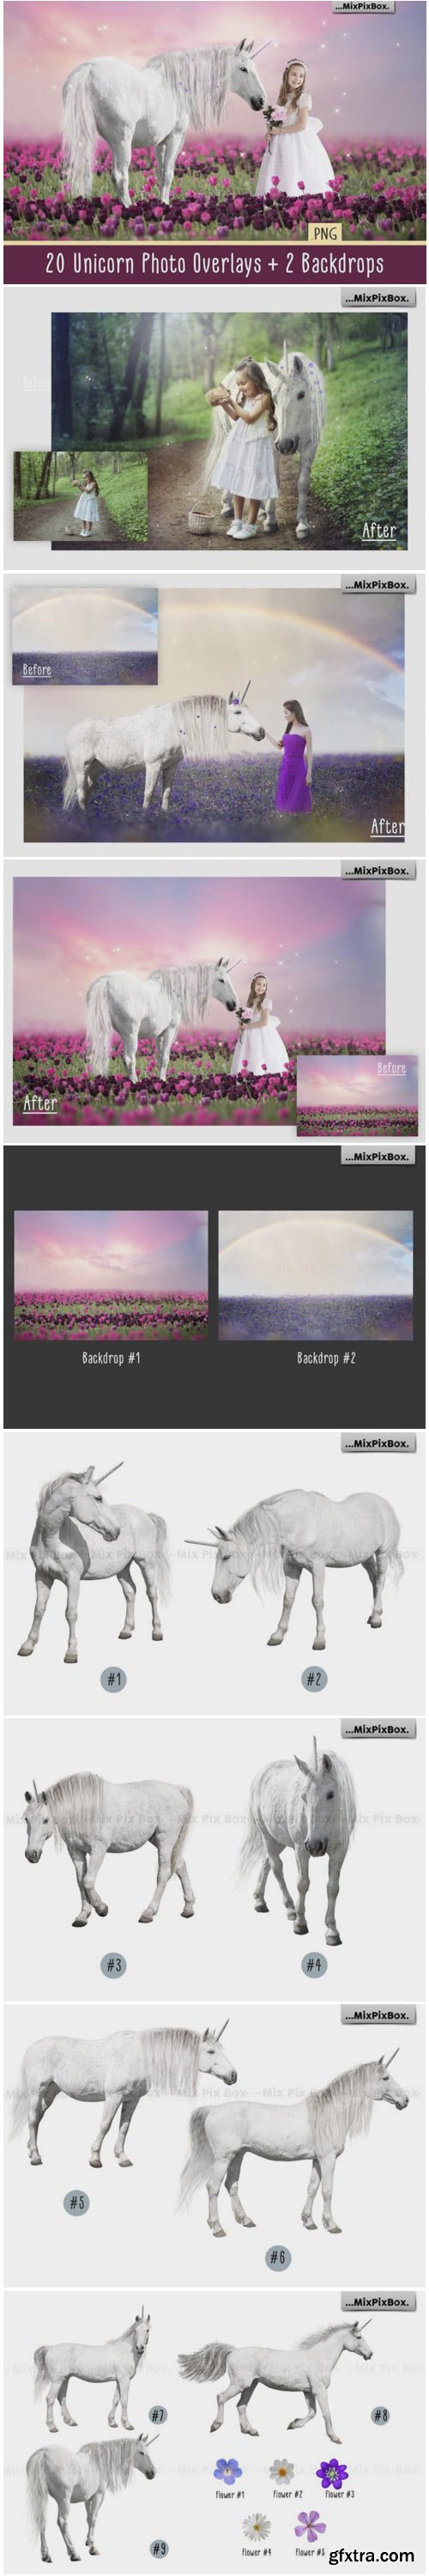 Unicorn PNG Overlays Pack+ Backdrops 1485717